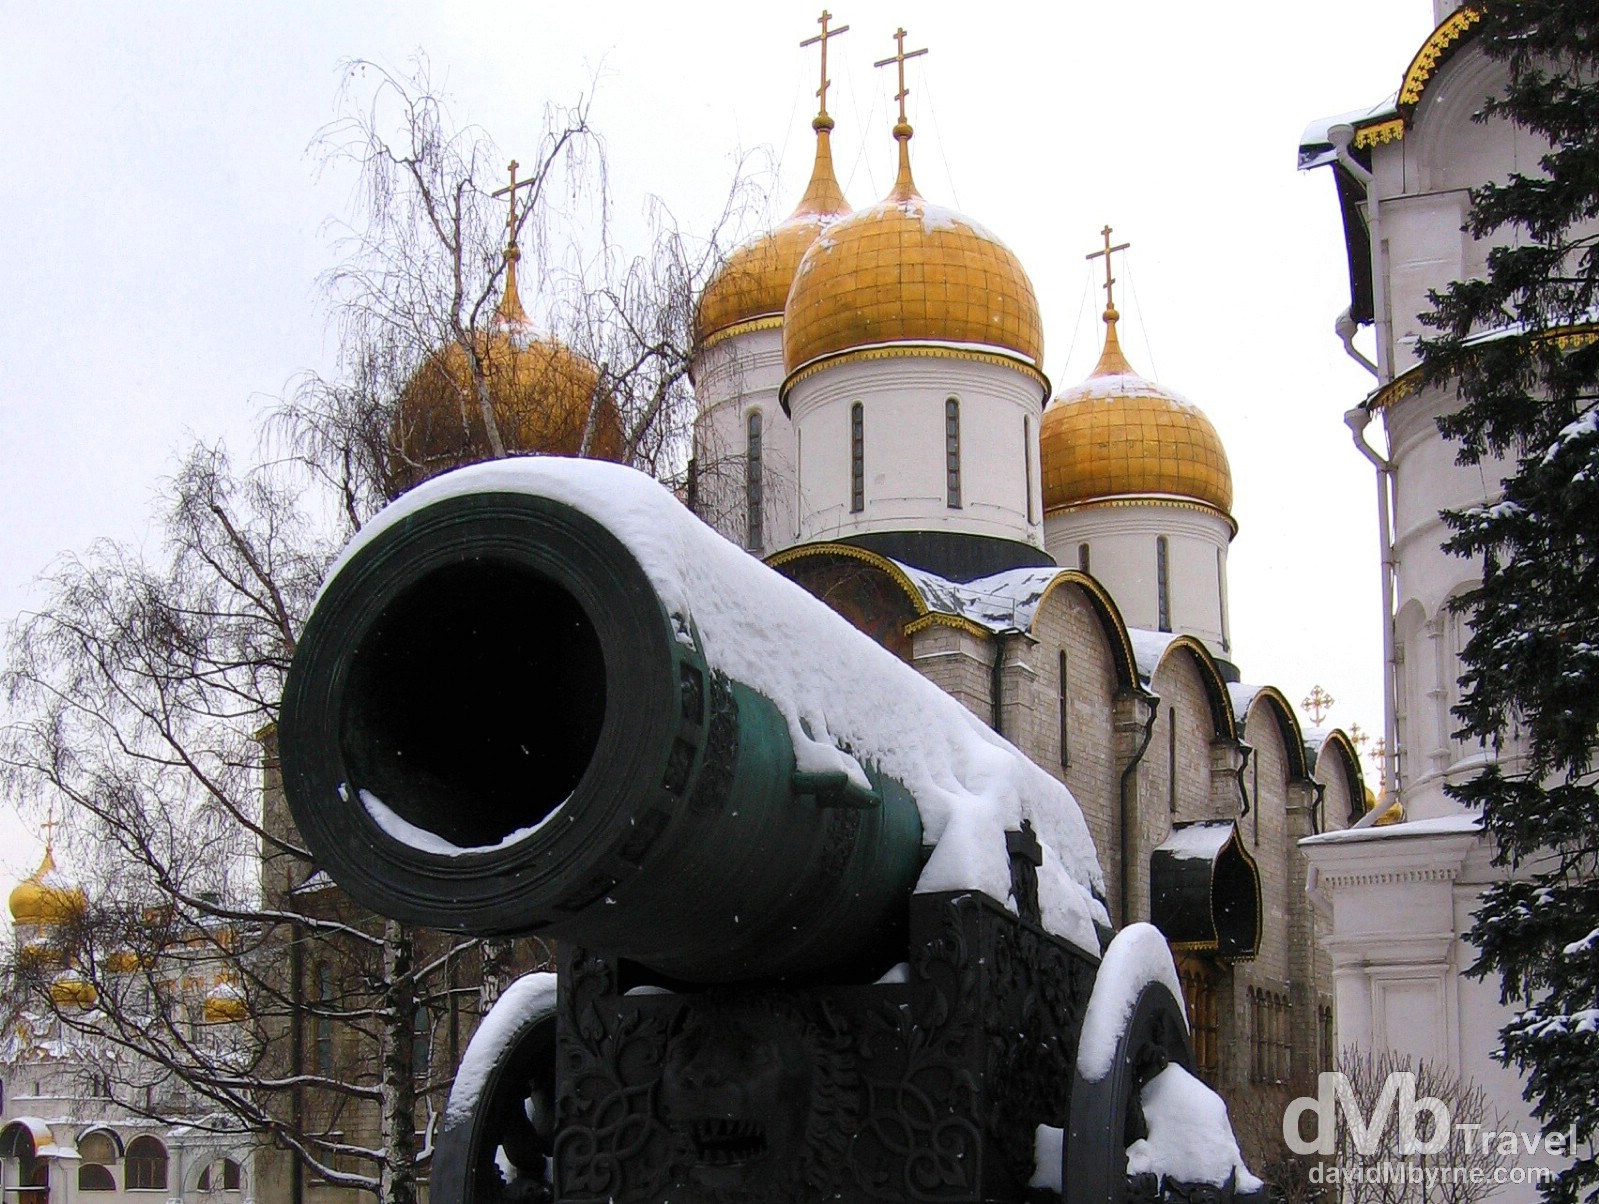 The massive Tsar Canon in front of the Assumption Cathedral in the grounds of the Kremlin in Moscow, Russia. February 26, 2006.